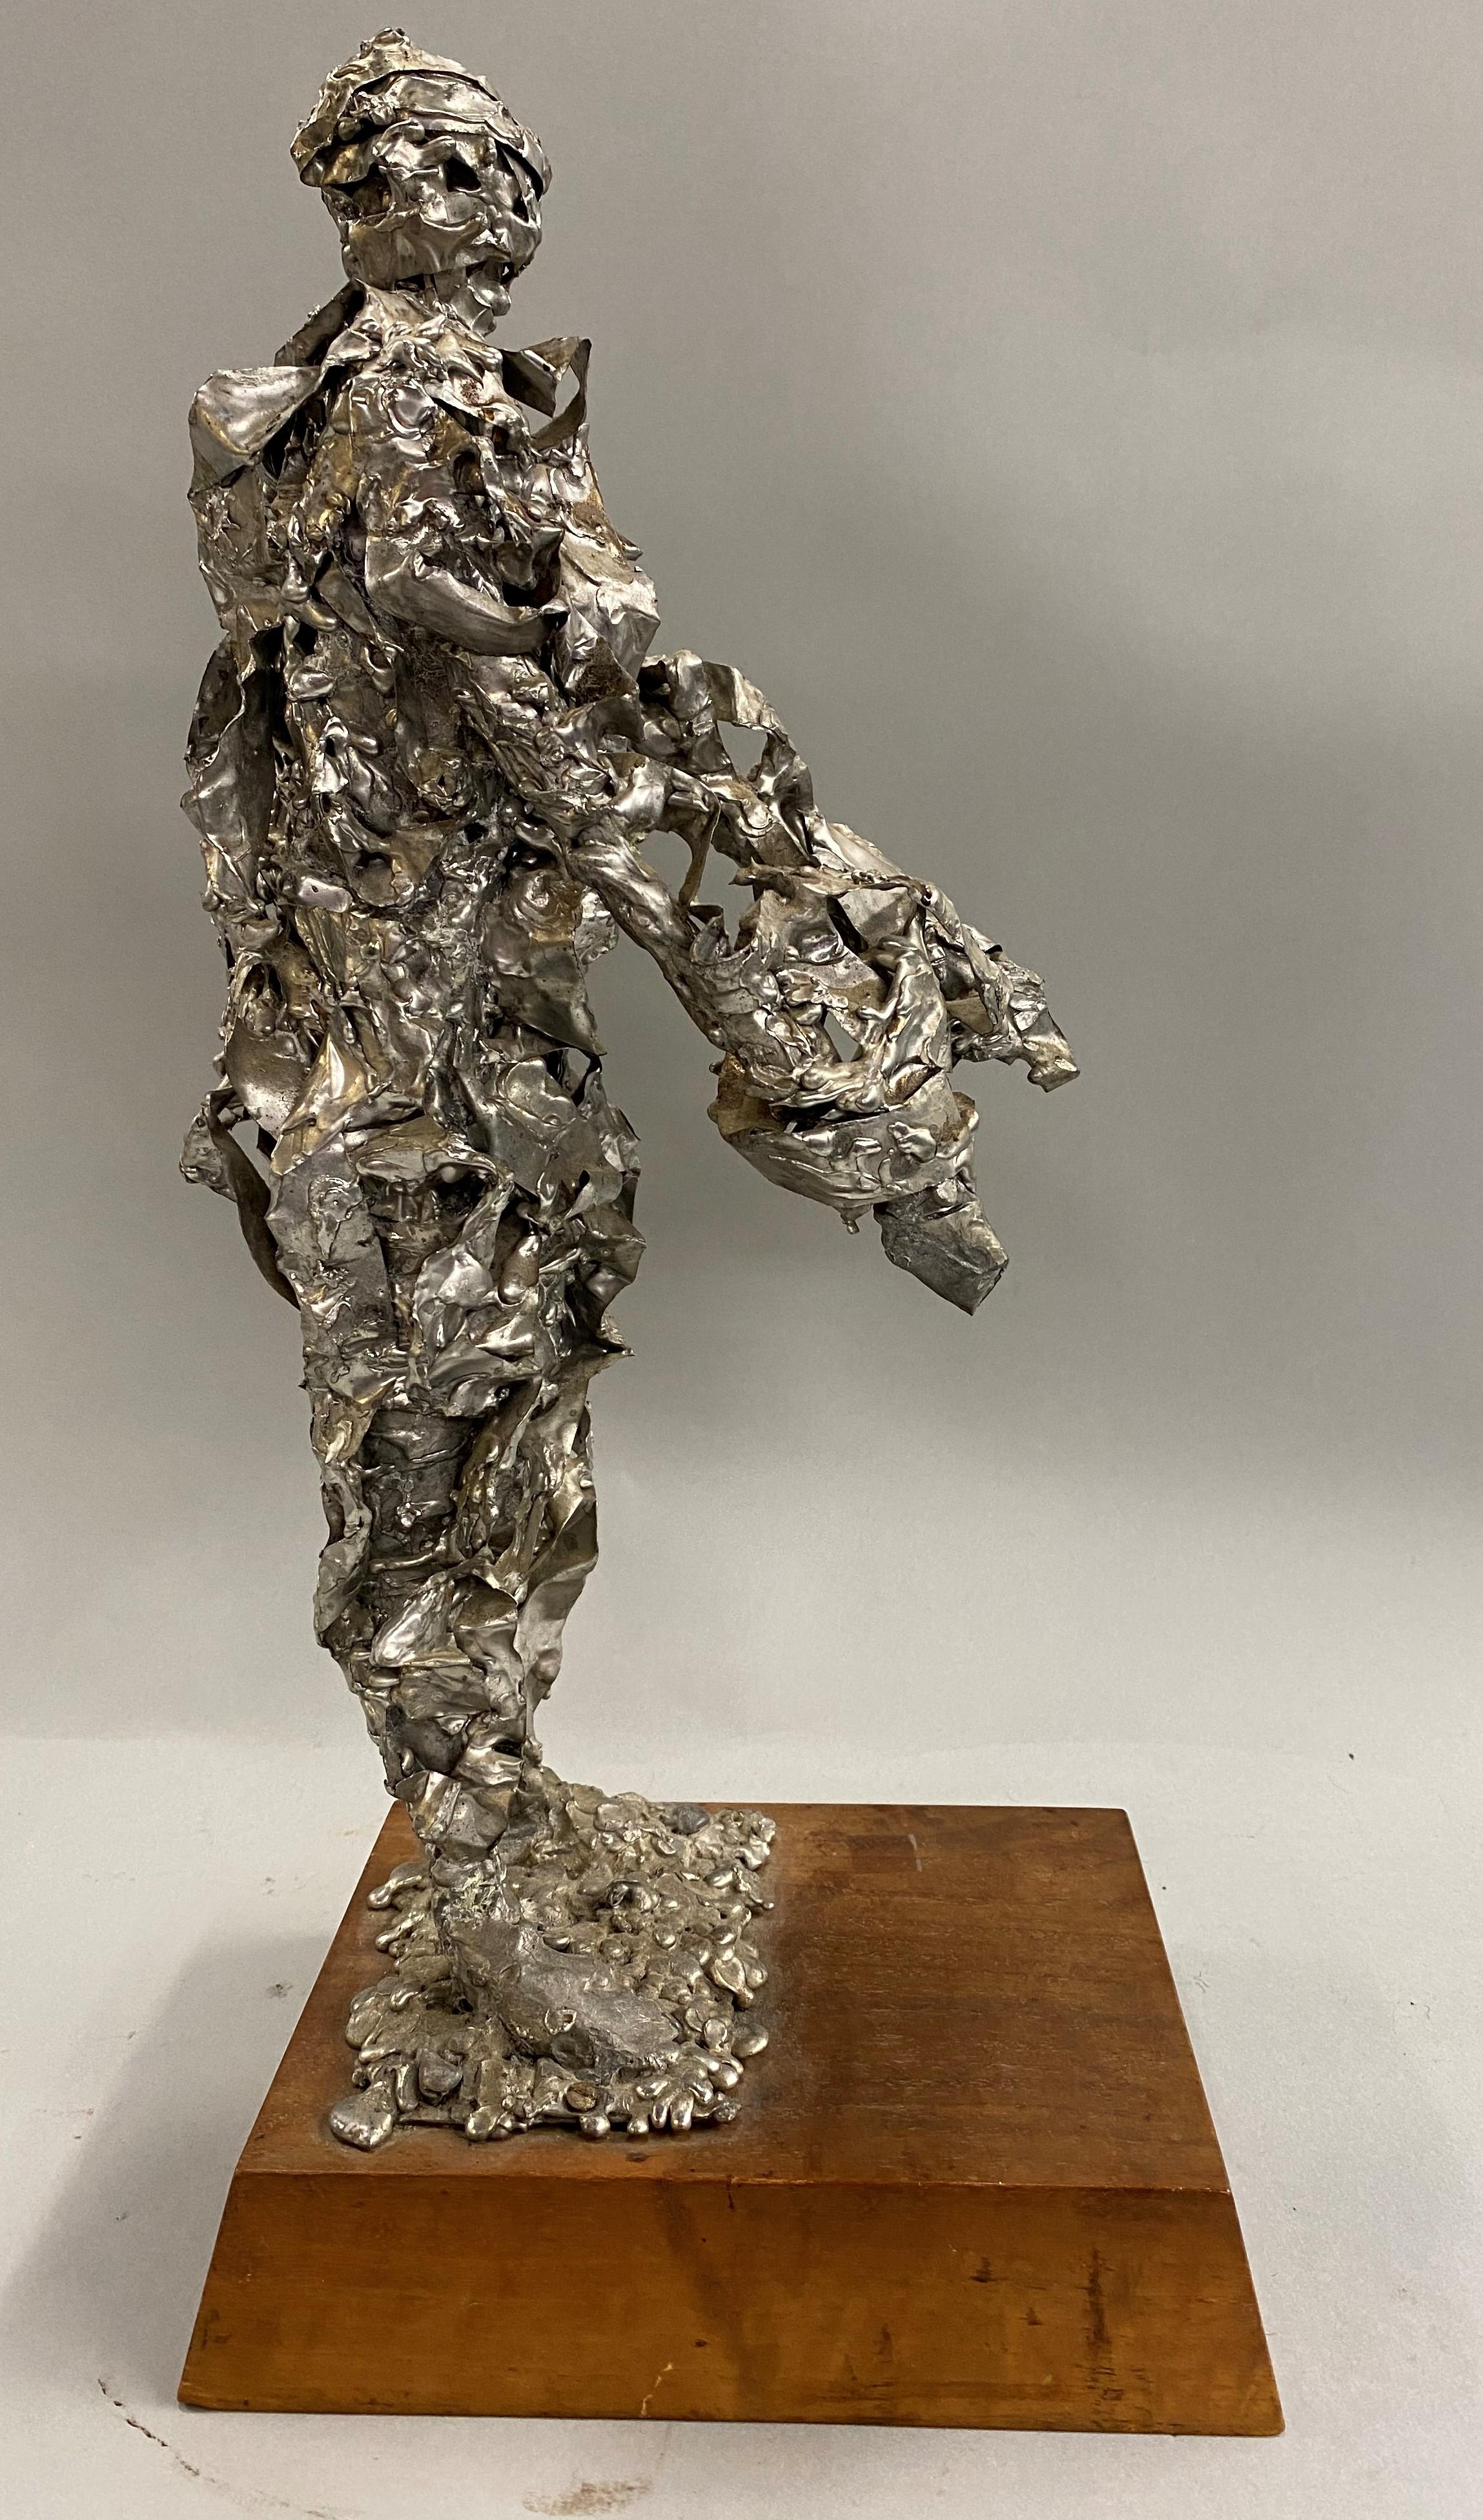 A fine modern mid century brutalist sculpture of a man with arms extended forward, in silver plated heavy metal, probably lead or bronze, unsigned, and mounted on a dimensional museum style wooden base, with minor staining in spots Provenance: